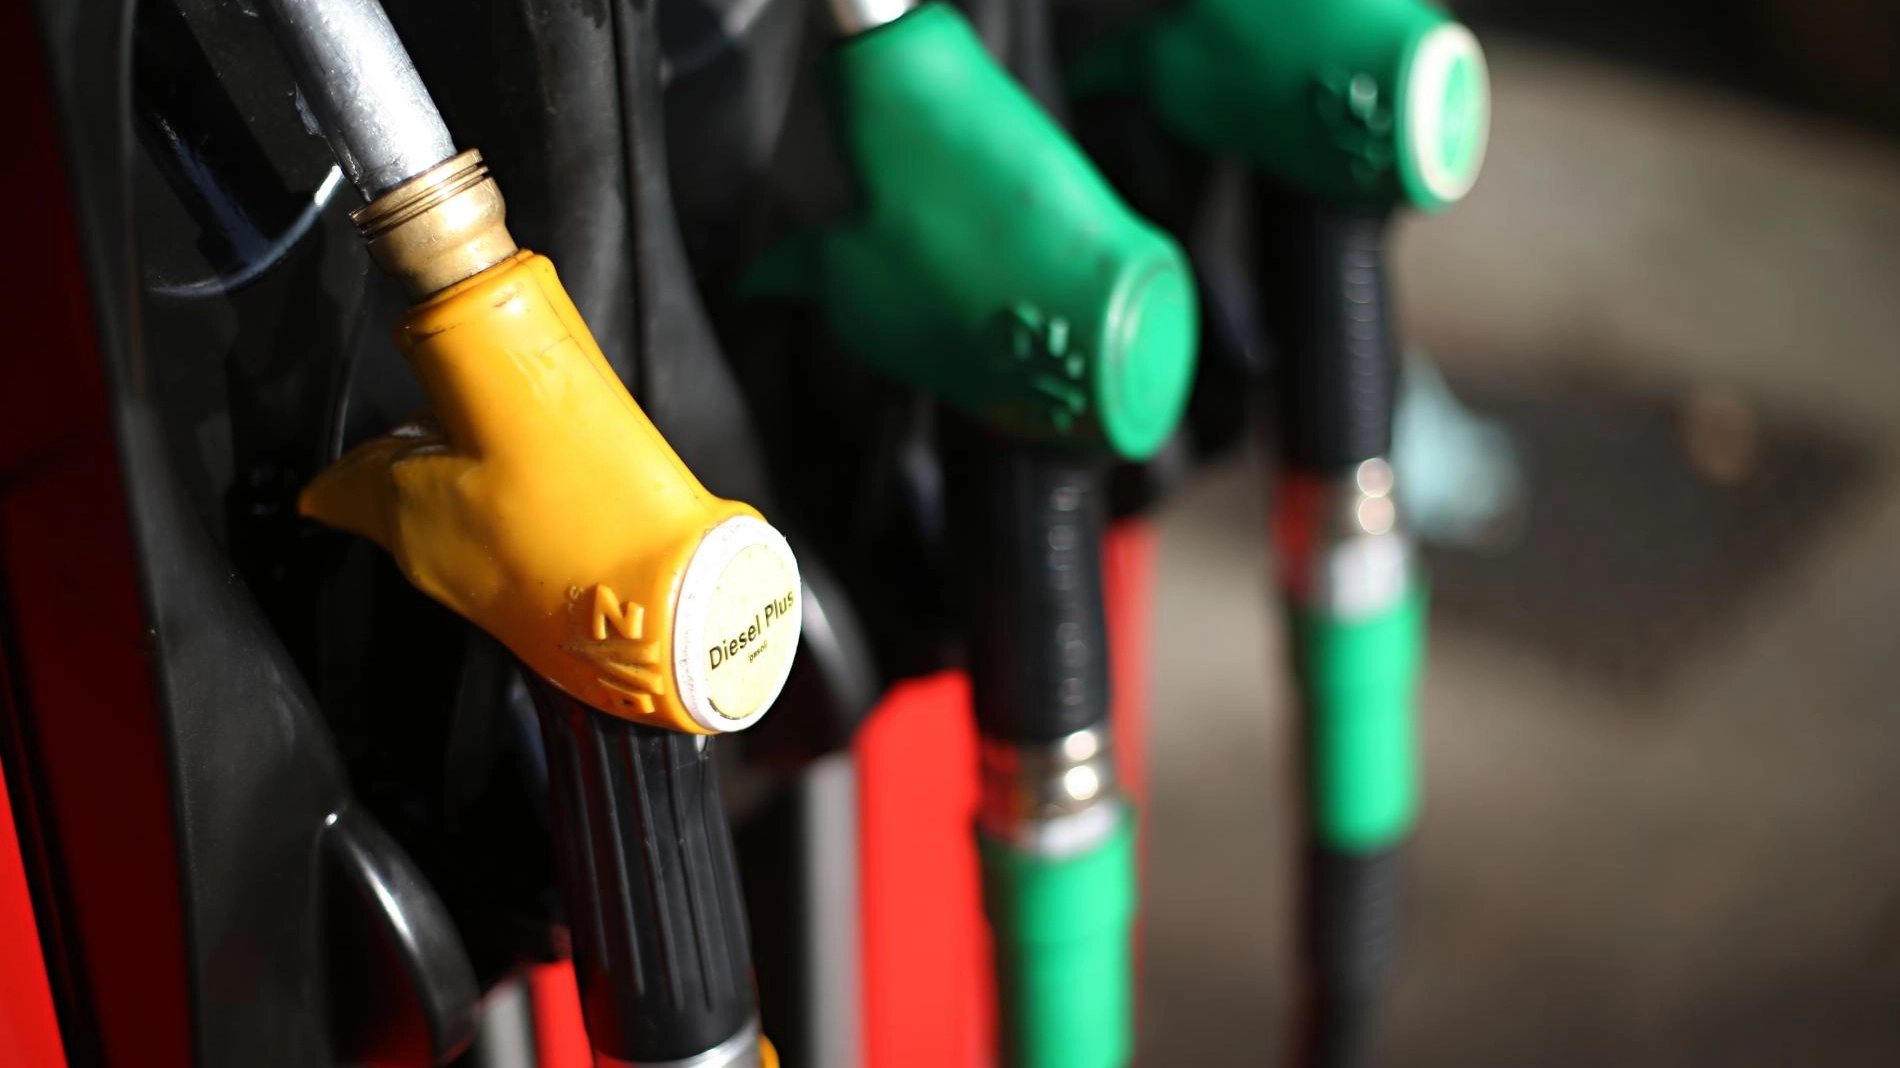 Update on Current Fuel Prices